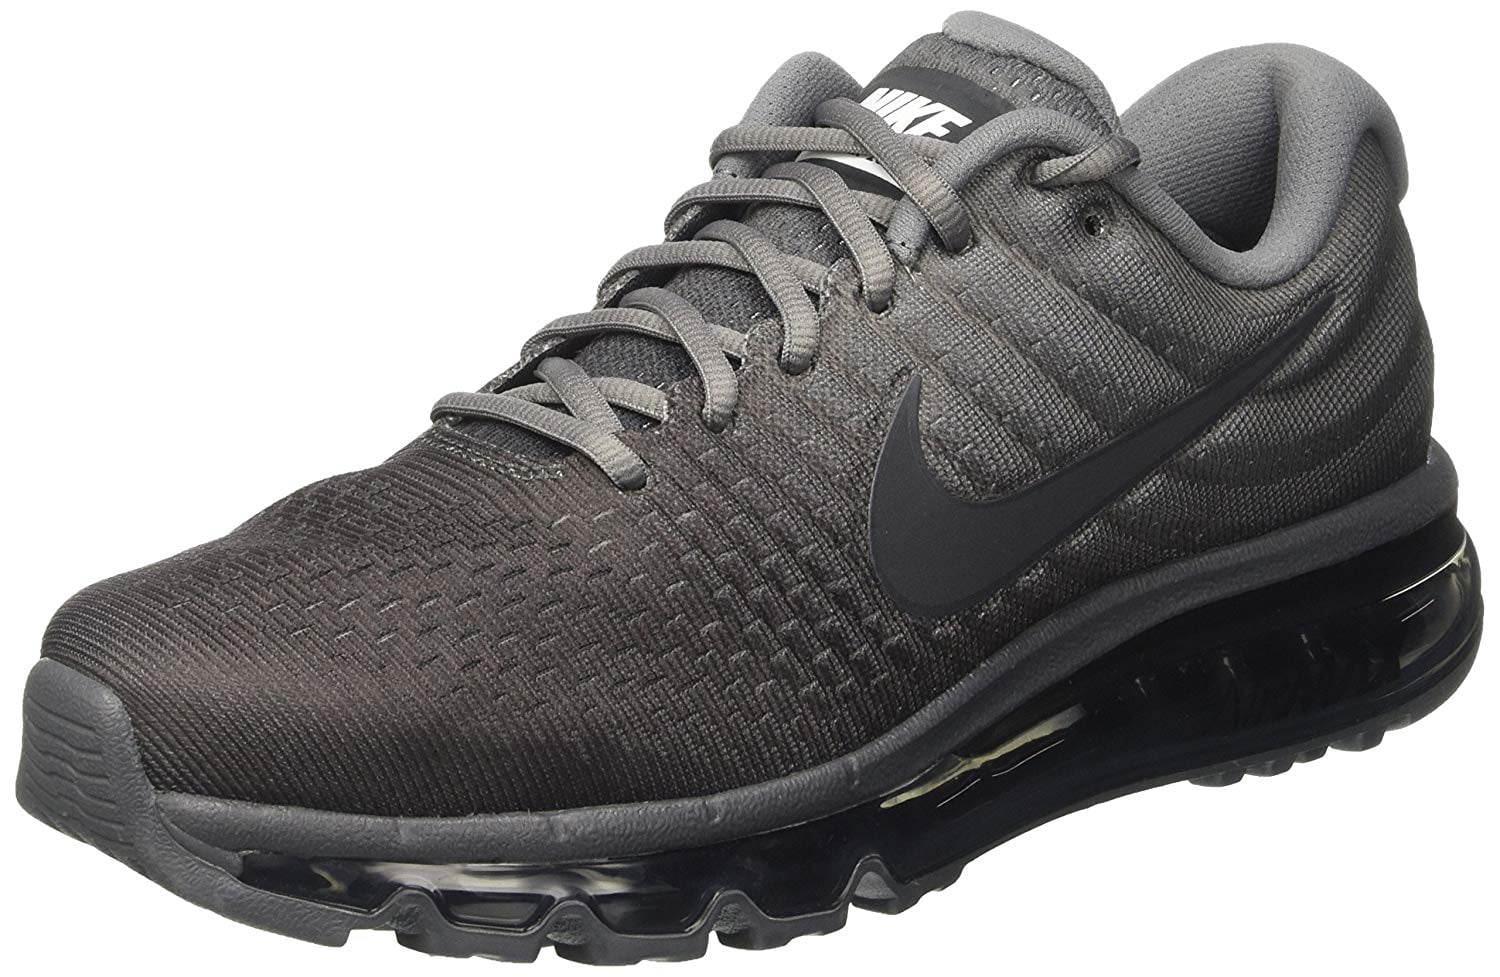 Intuition Extreme Compliment Nike Men's Air Max 2017 Running Shoes (11 M US, Cool Grey/Antracite/Dark  Grey) - Walmart.com